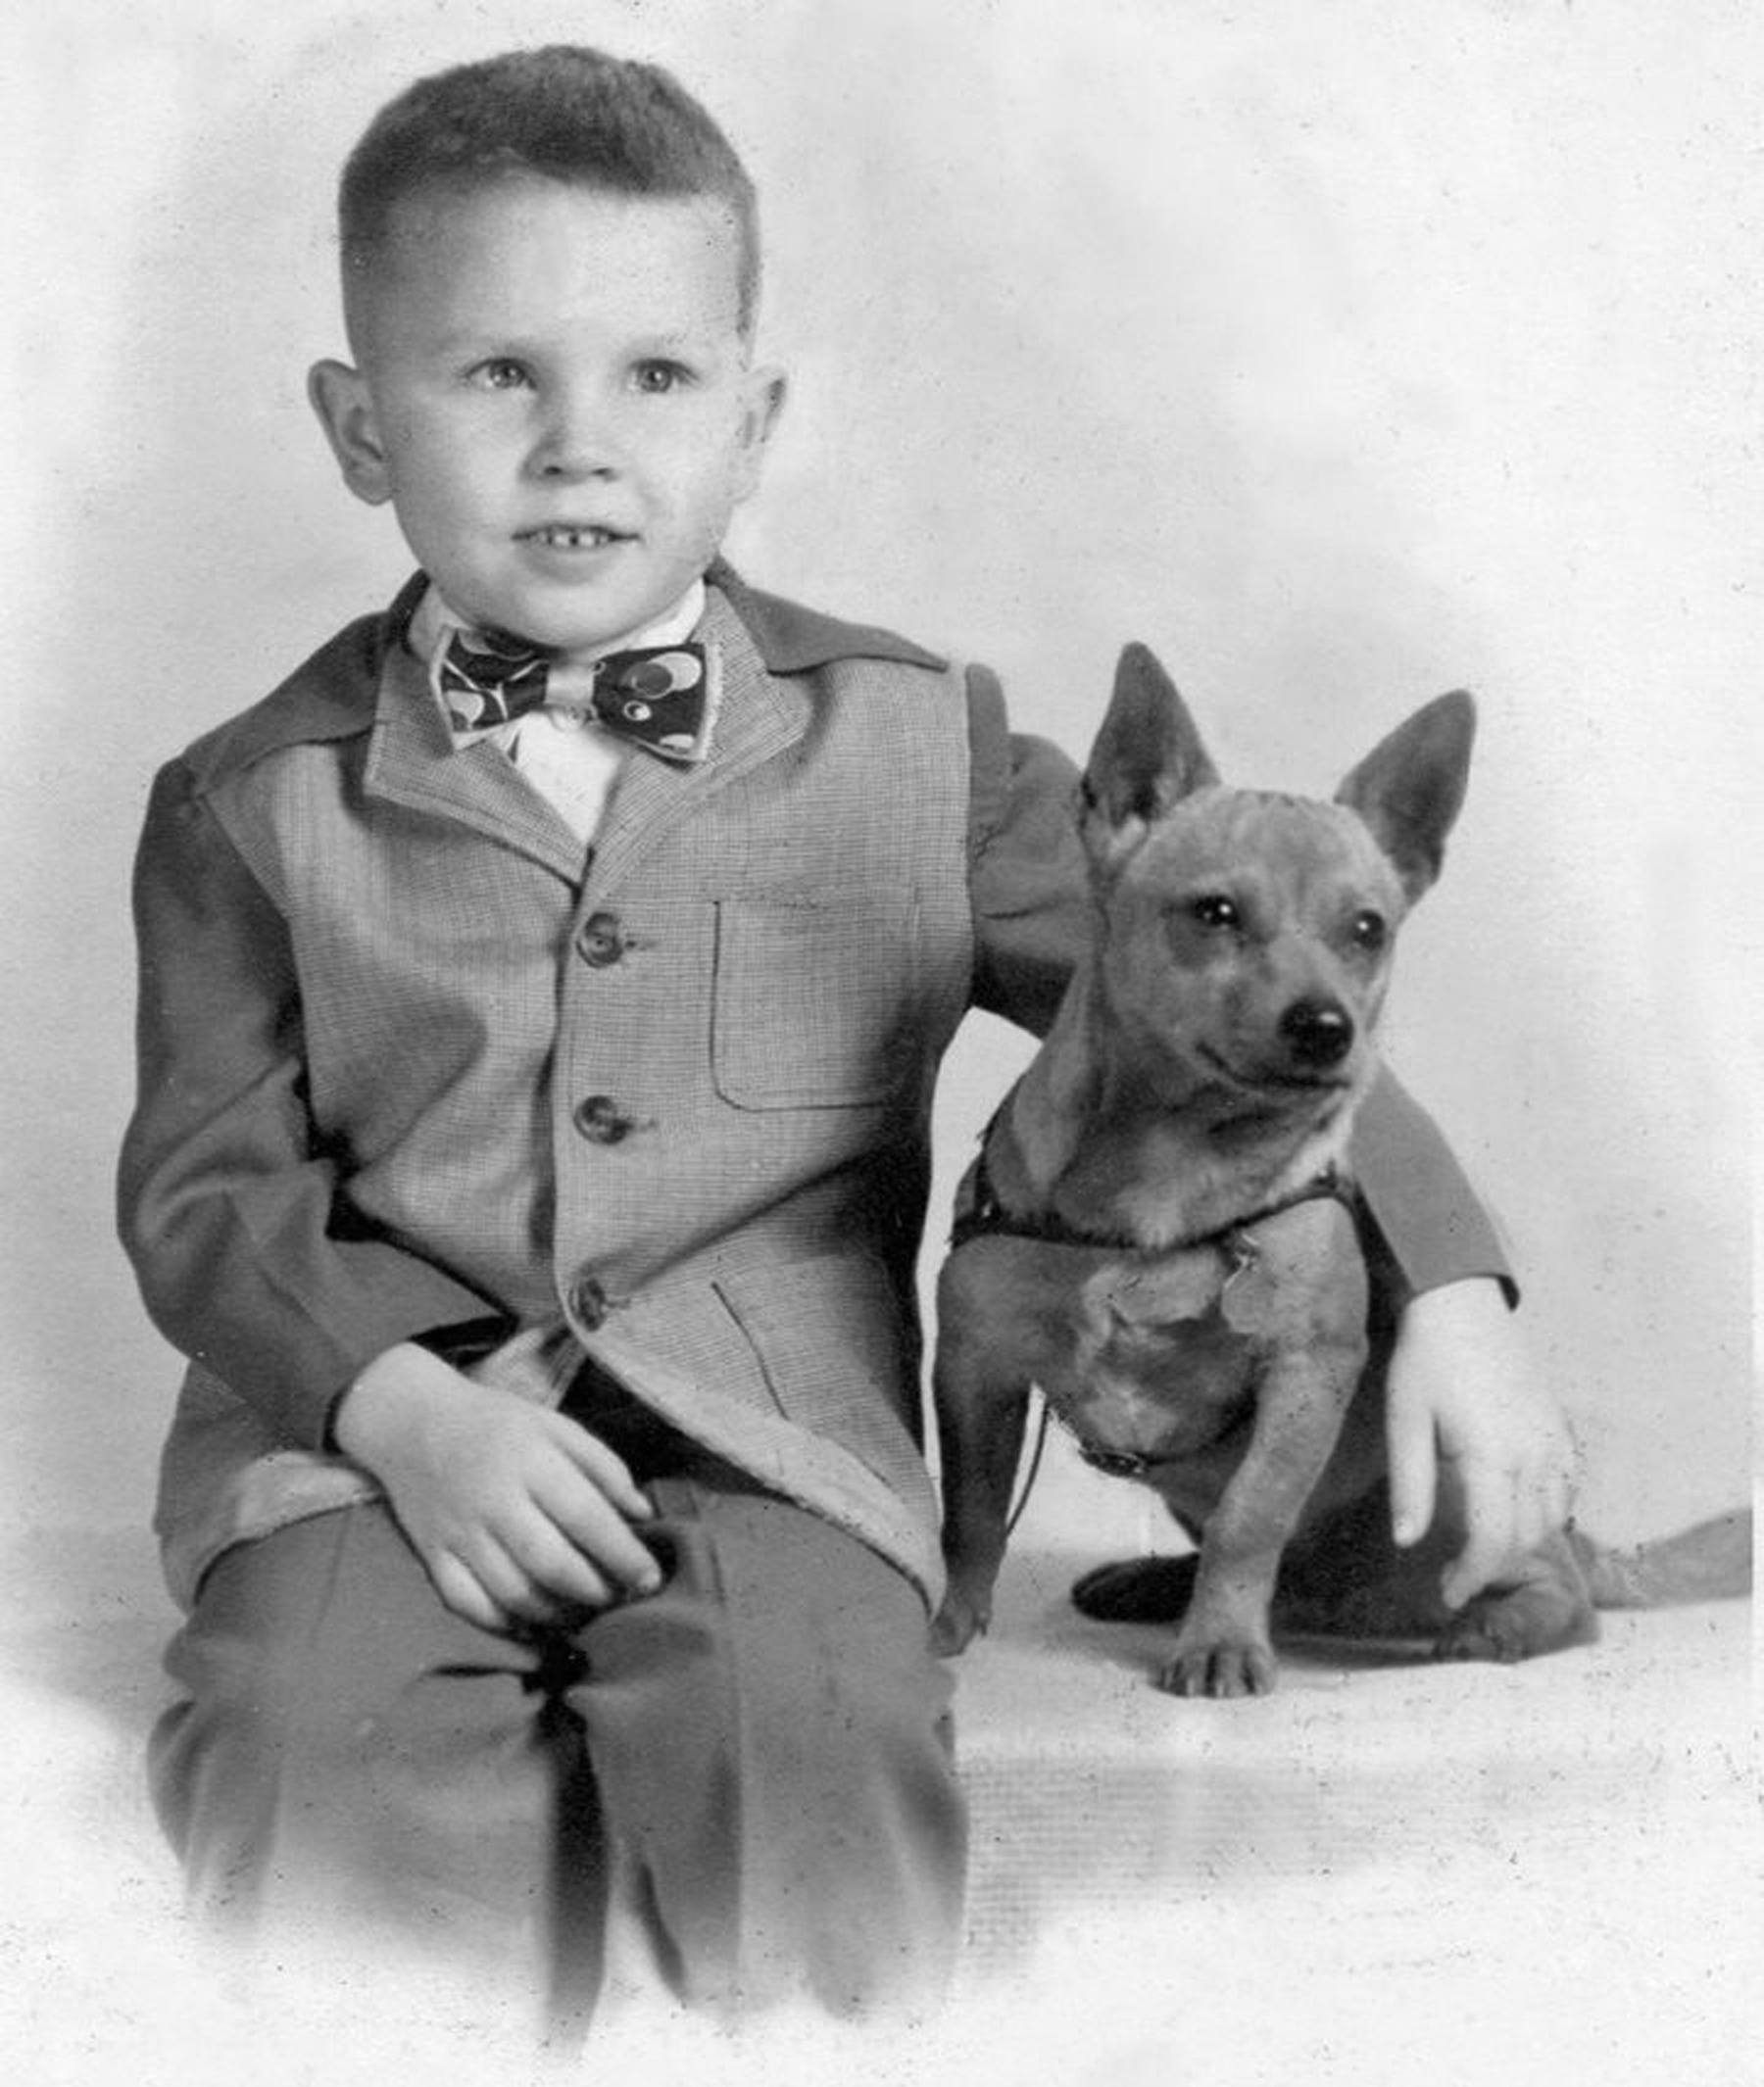 Black and white photo of a young boy in a suit with his arm around a small dog.